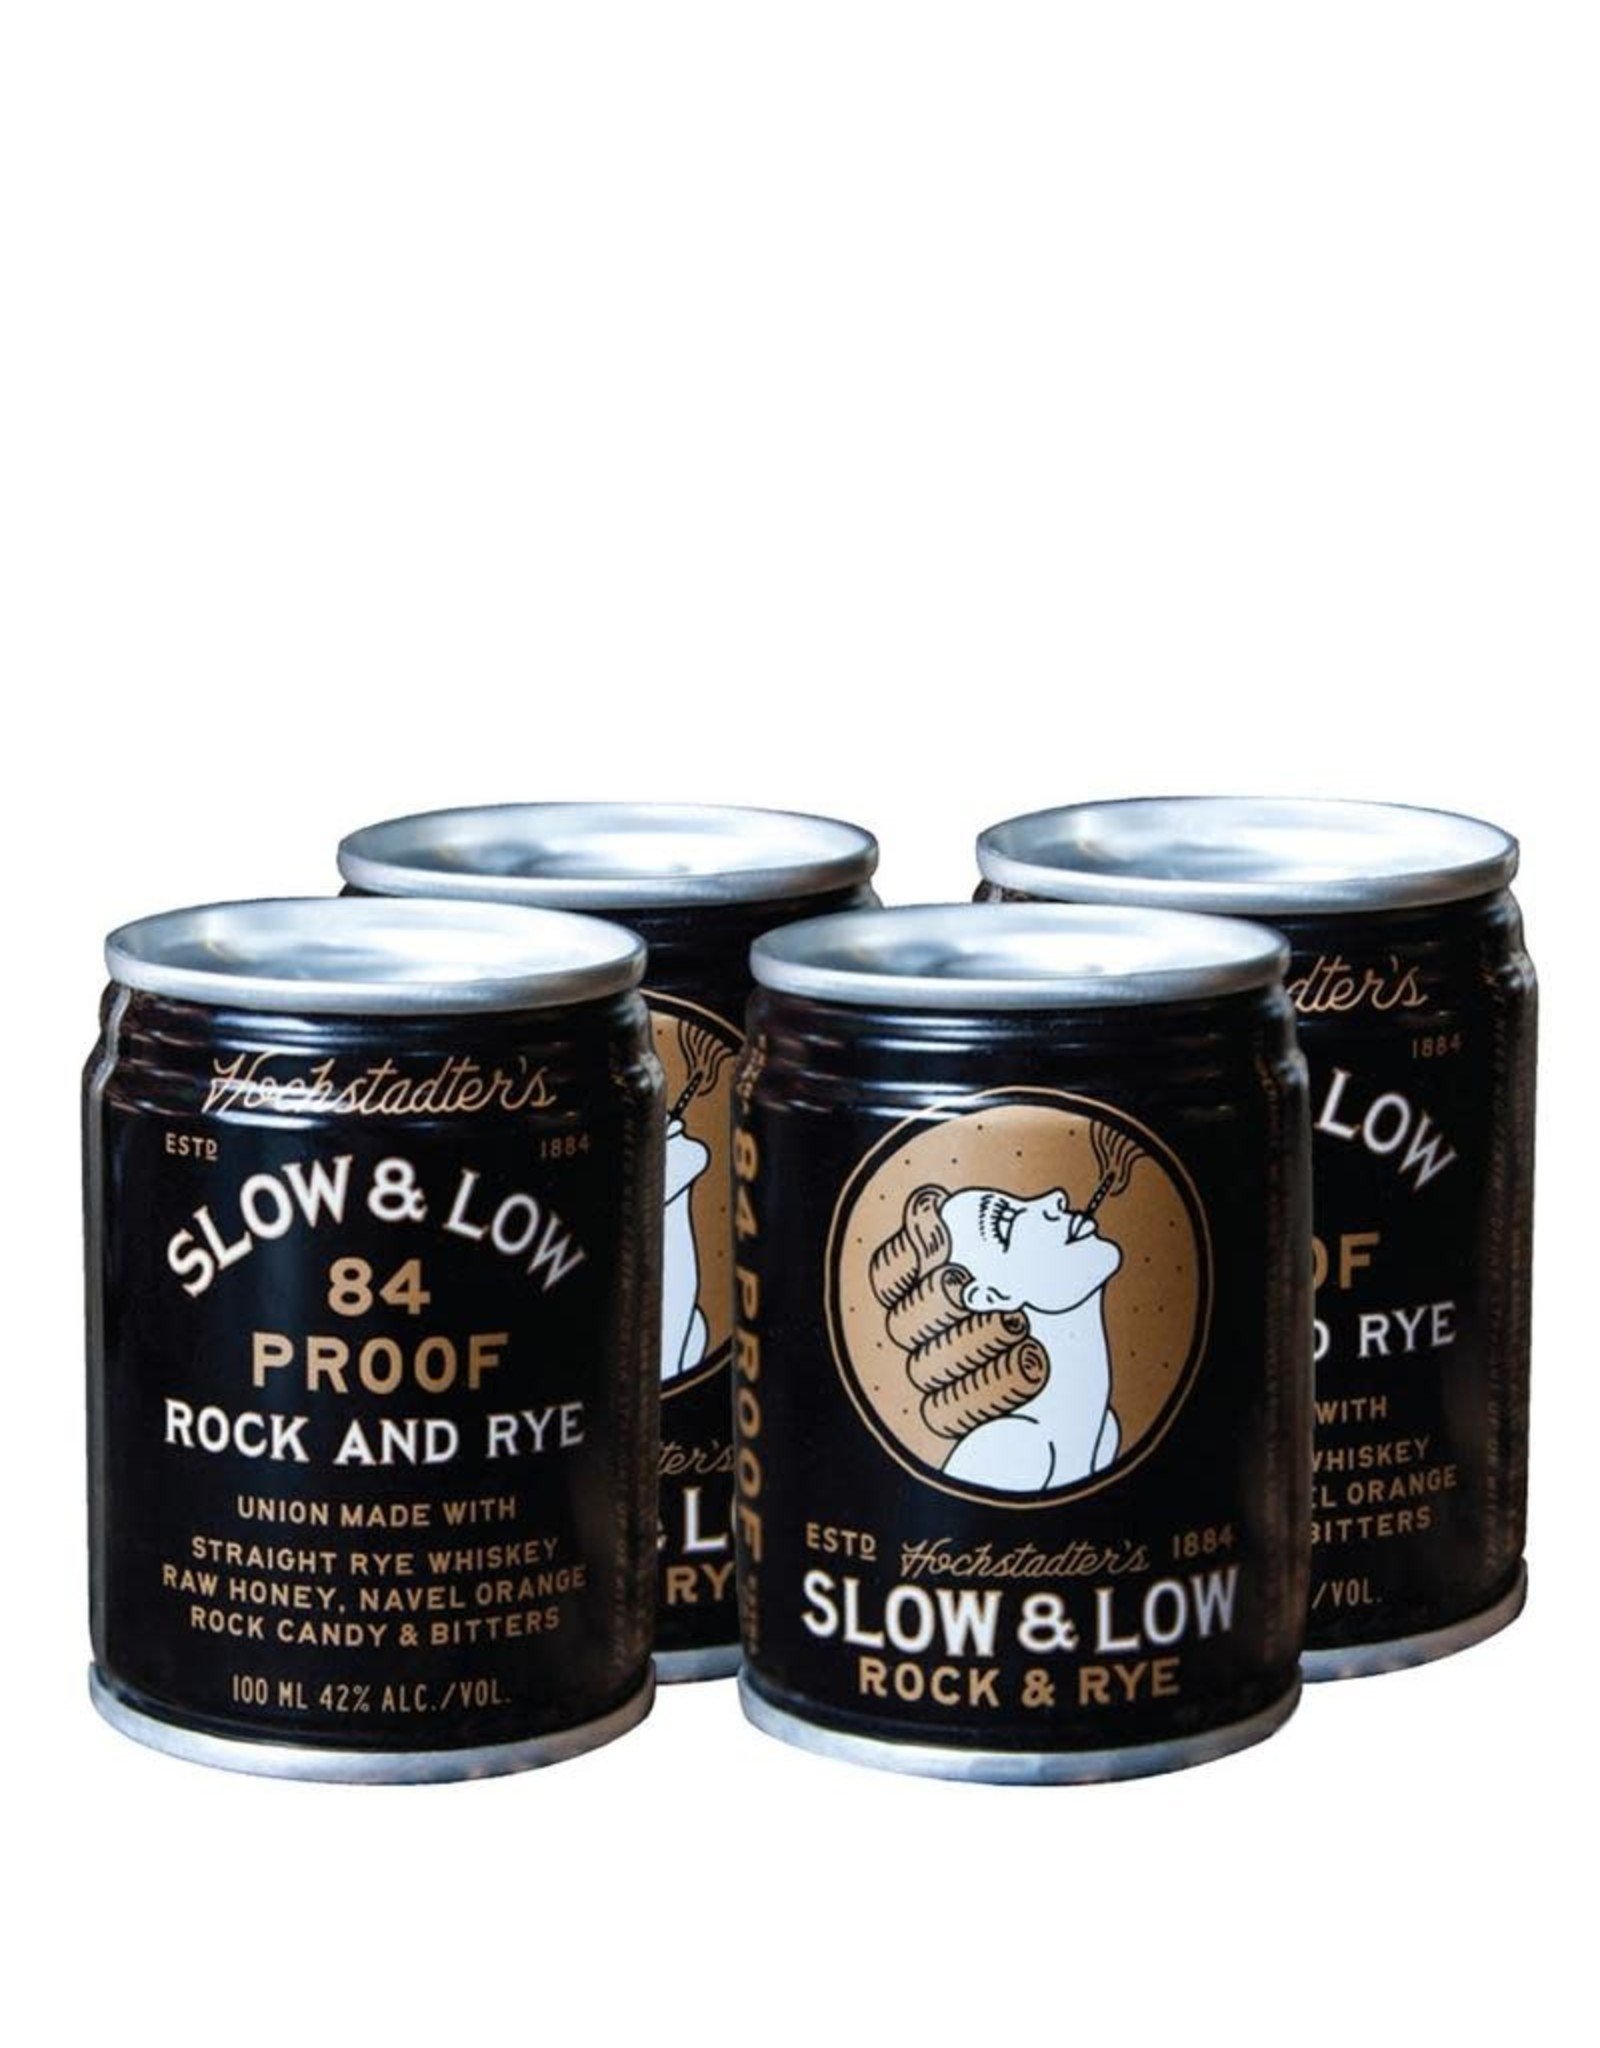 Hochstadter's Slow & Low Rock and Rye 100 ml can 4 pack